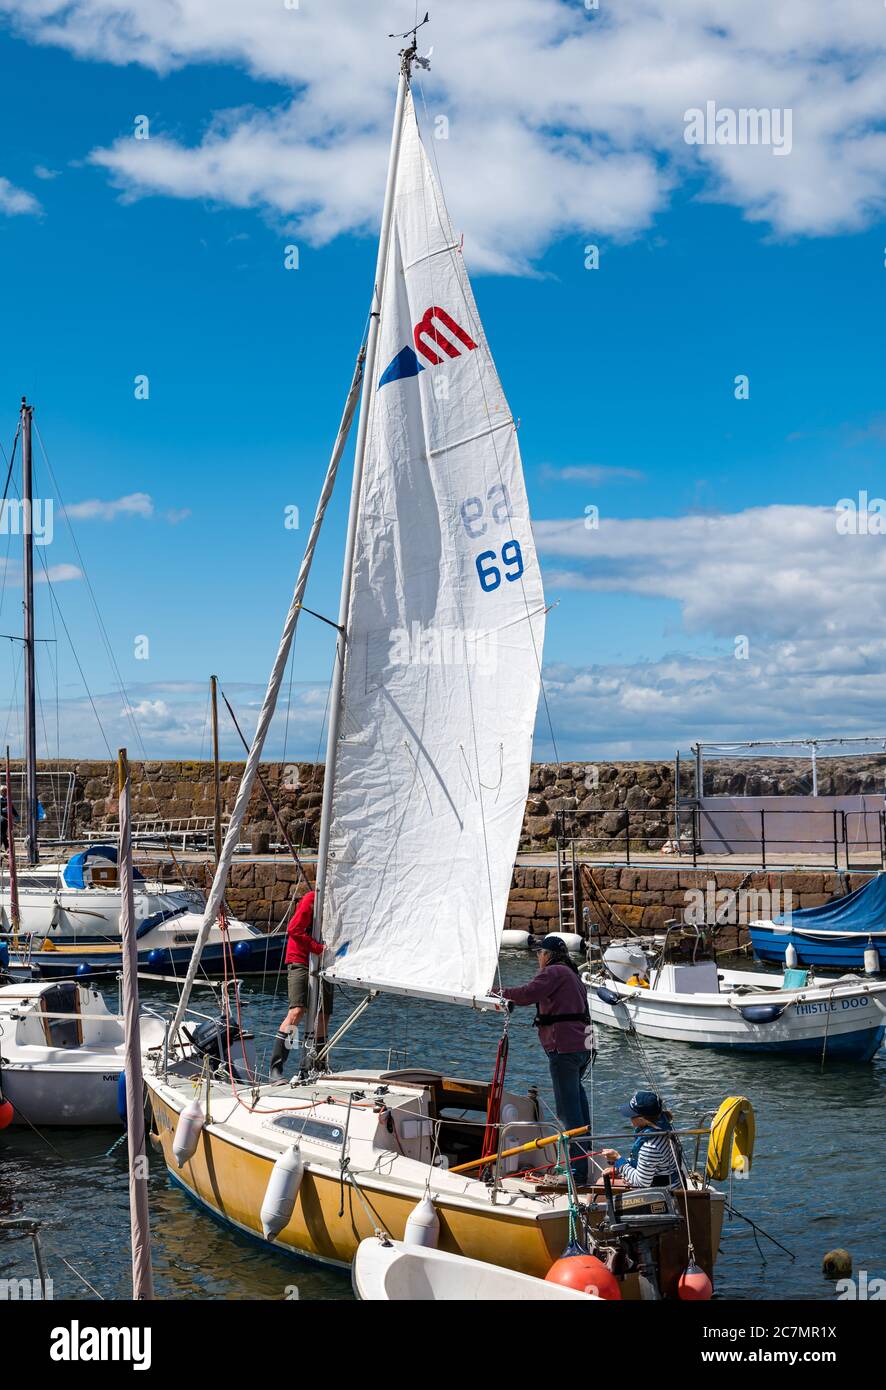 People putting up sail on a sailboat in harbour, North Berwick, East Lothian, Scotland, UK Stock Photo